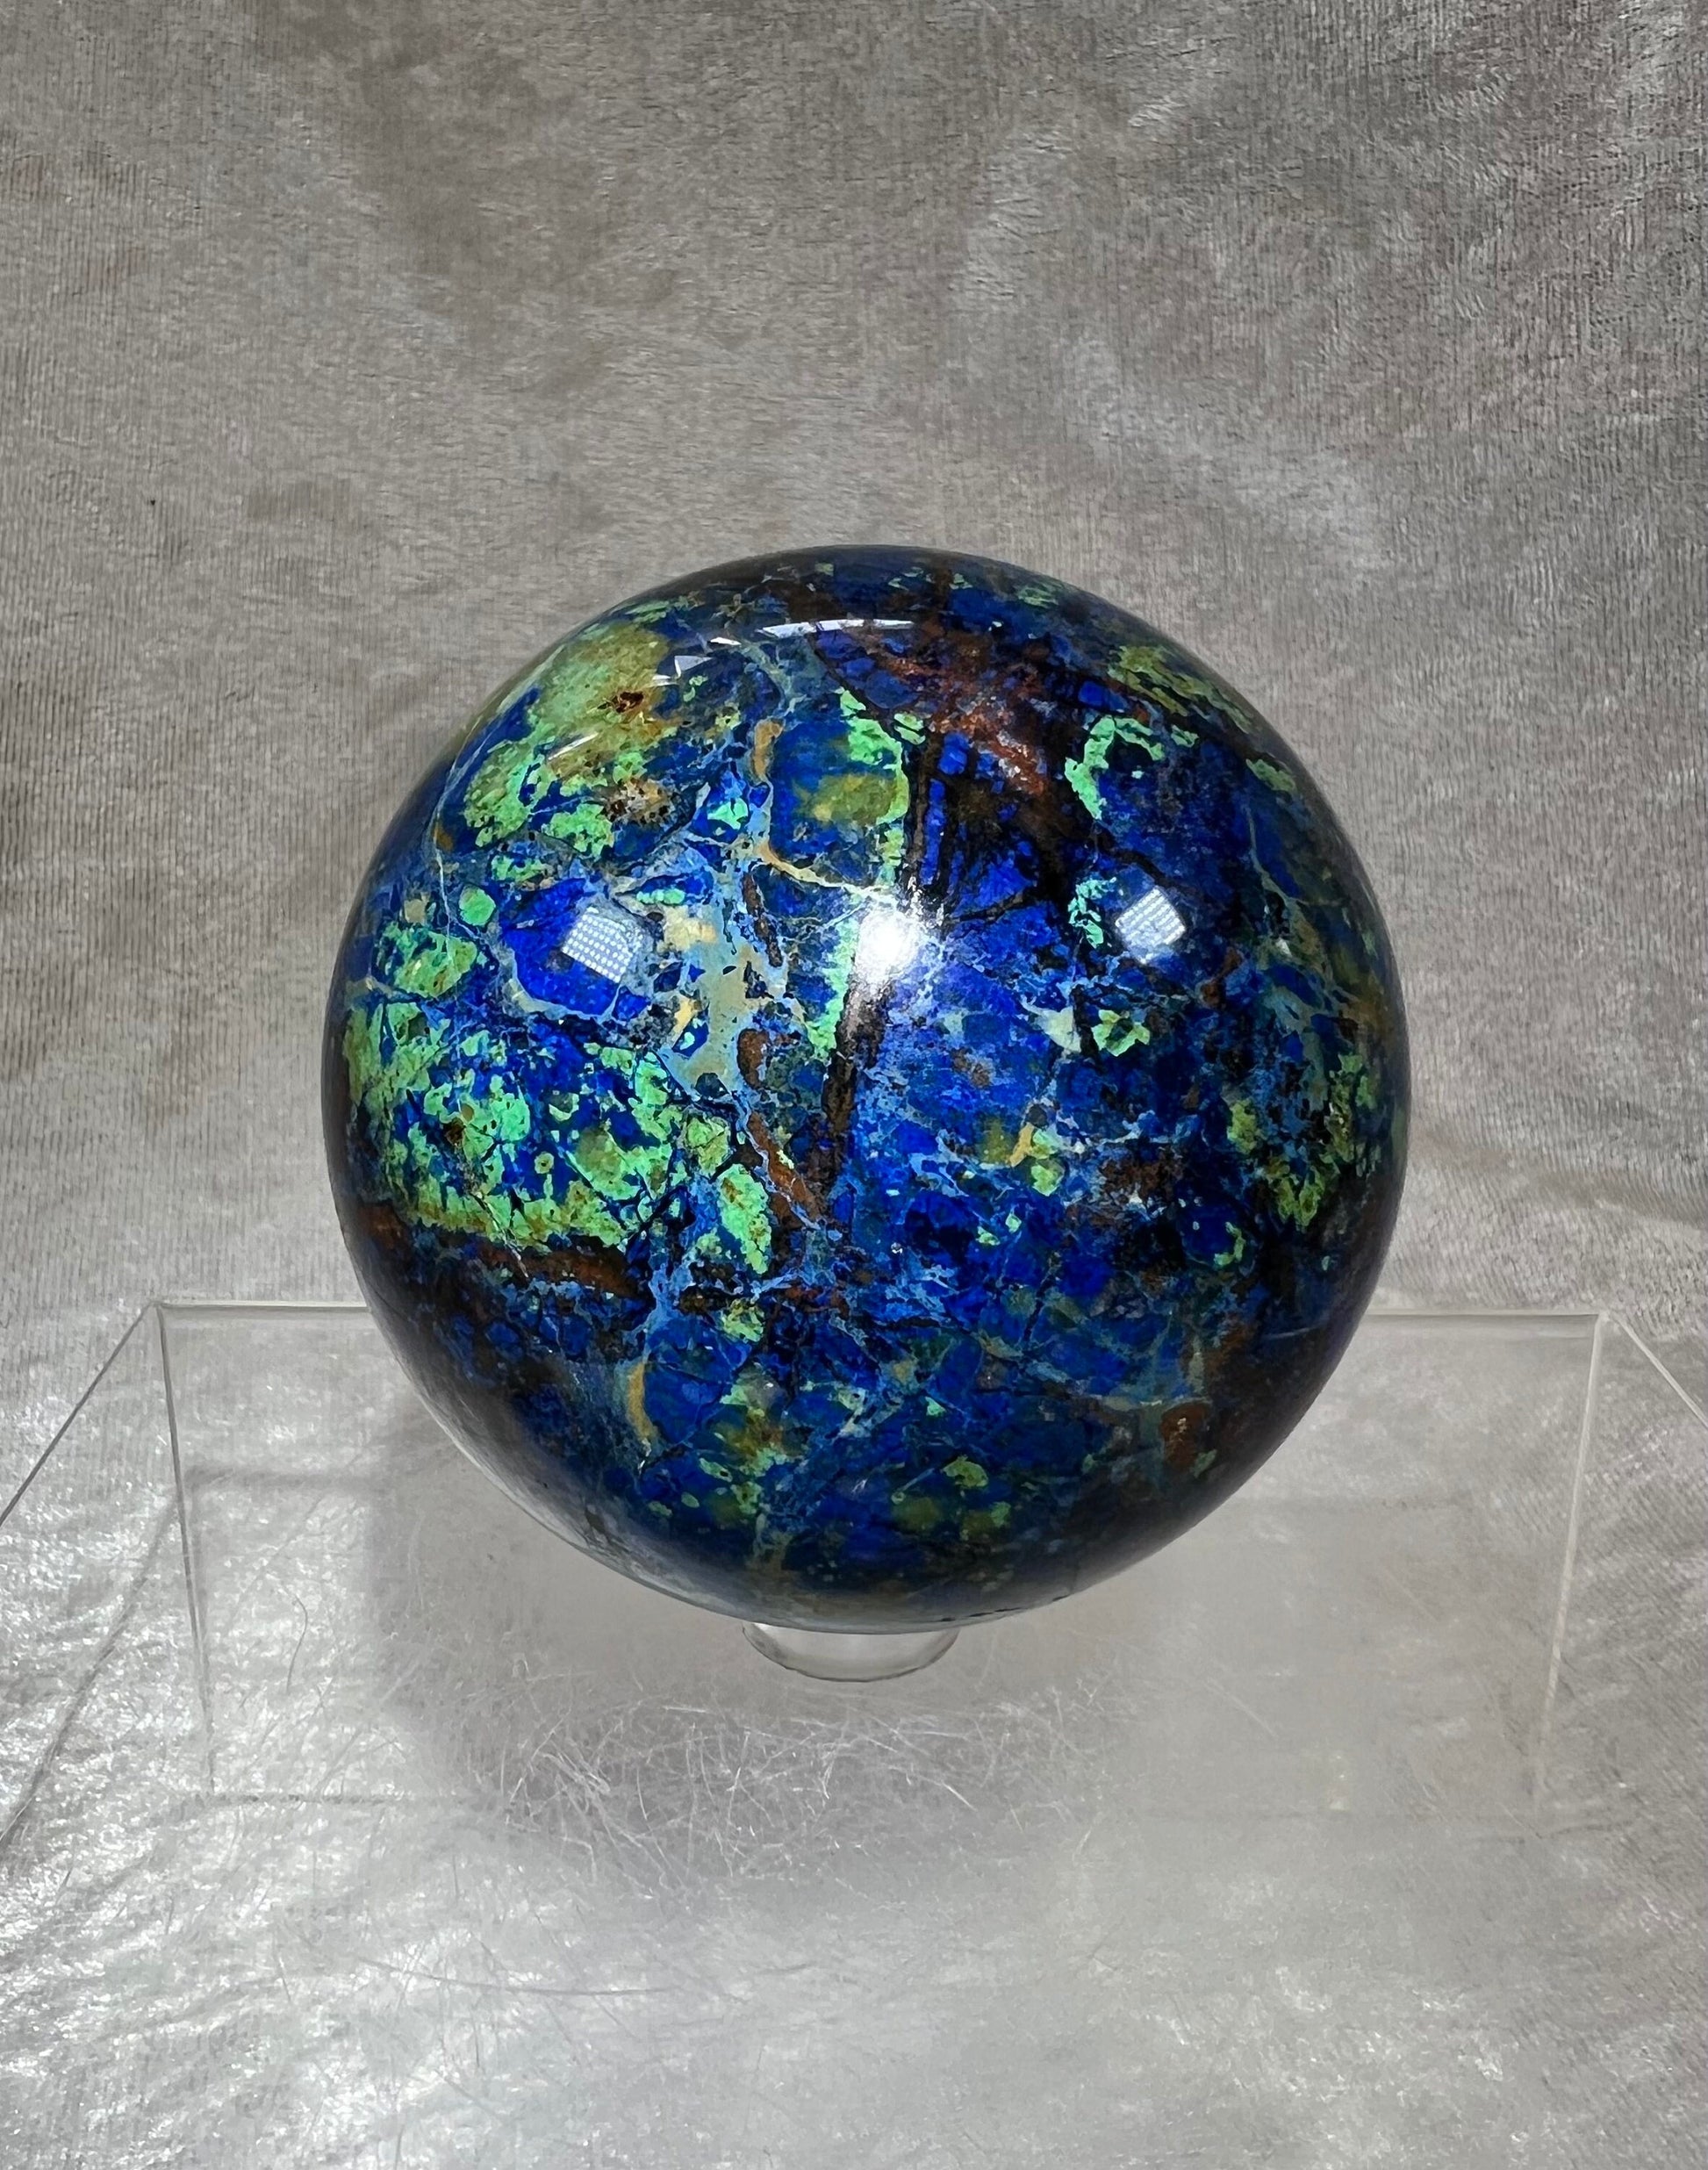 Beautiful Azurite and Malachite Crystal Sphere. 73mm. Incredible Colors And Patterns. Awesome Collectors Piece!